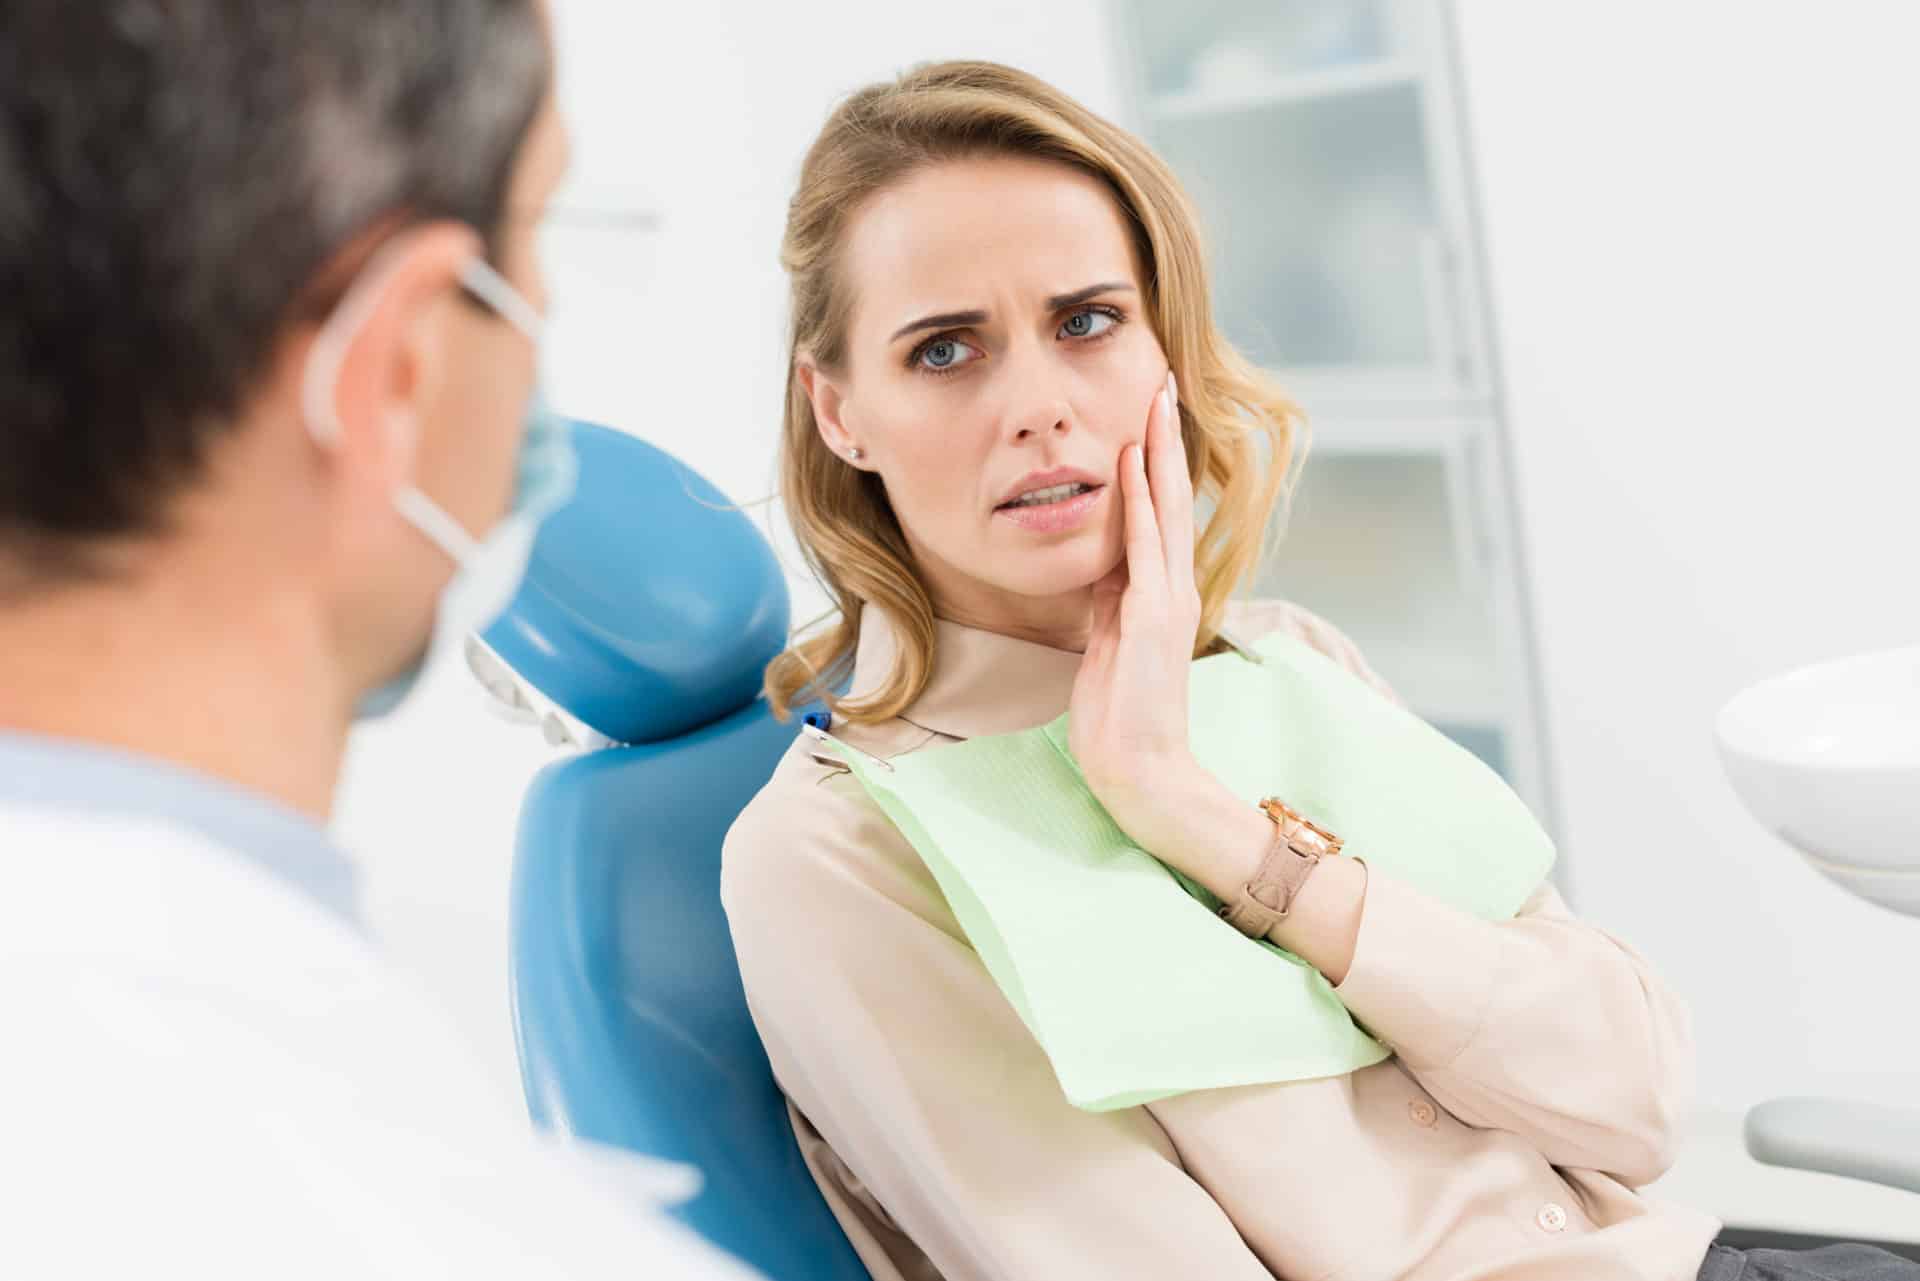 NY Dental Malpractice: What You Need to Know